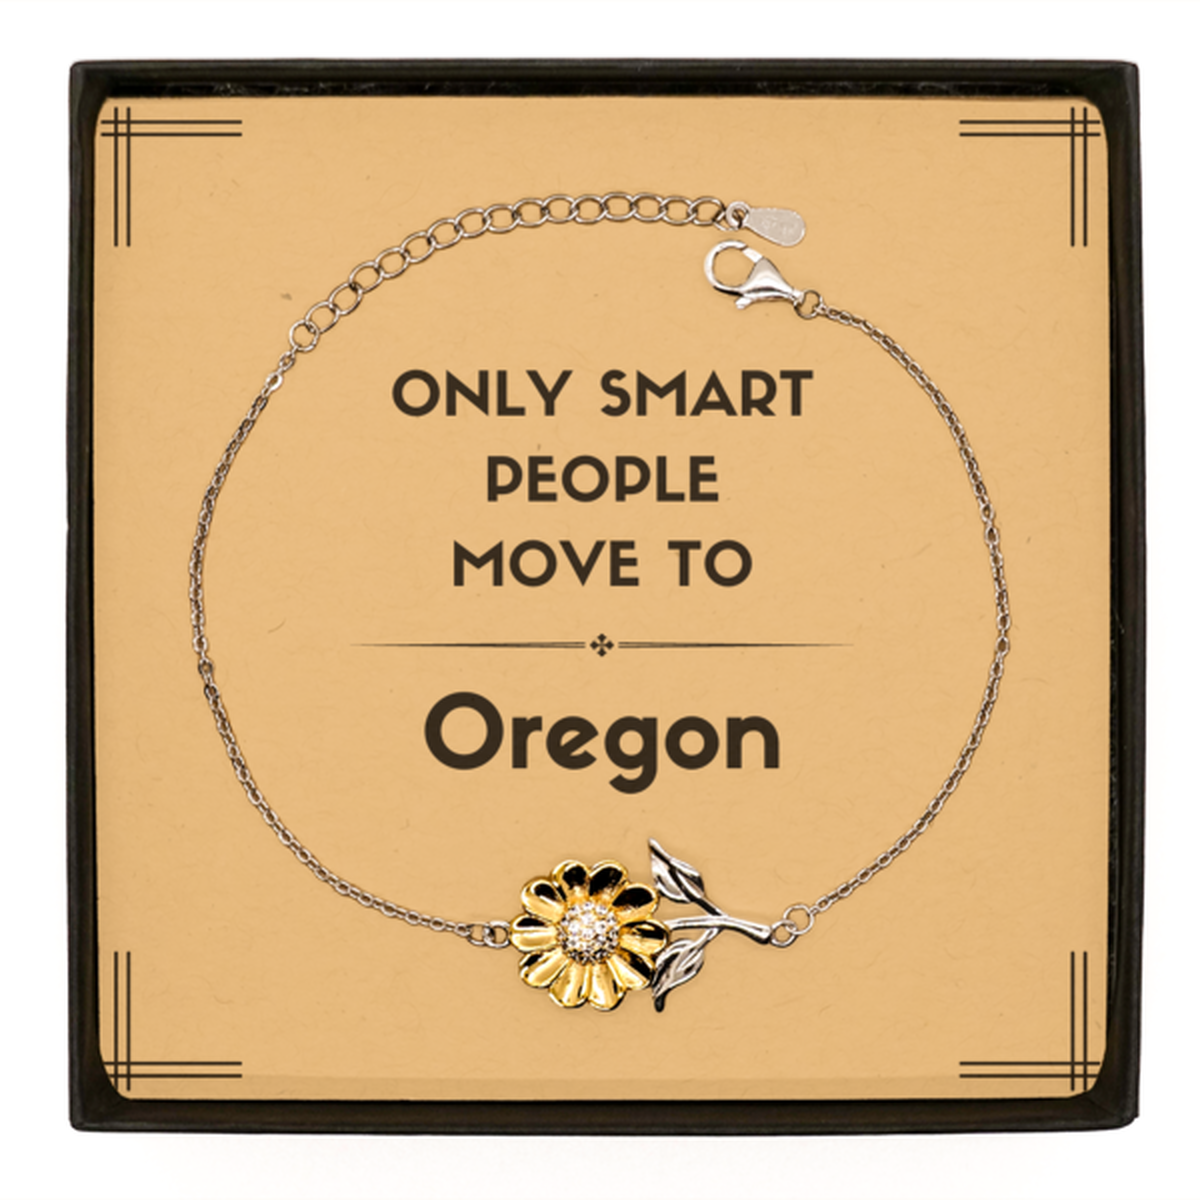 Only smart people move to Oregon Sunflower Bracelet, Message Card Gifts For Oregon, Move to Oregon Gifts for Friends Coworker Funny Saying Quote